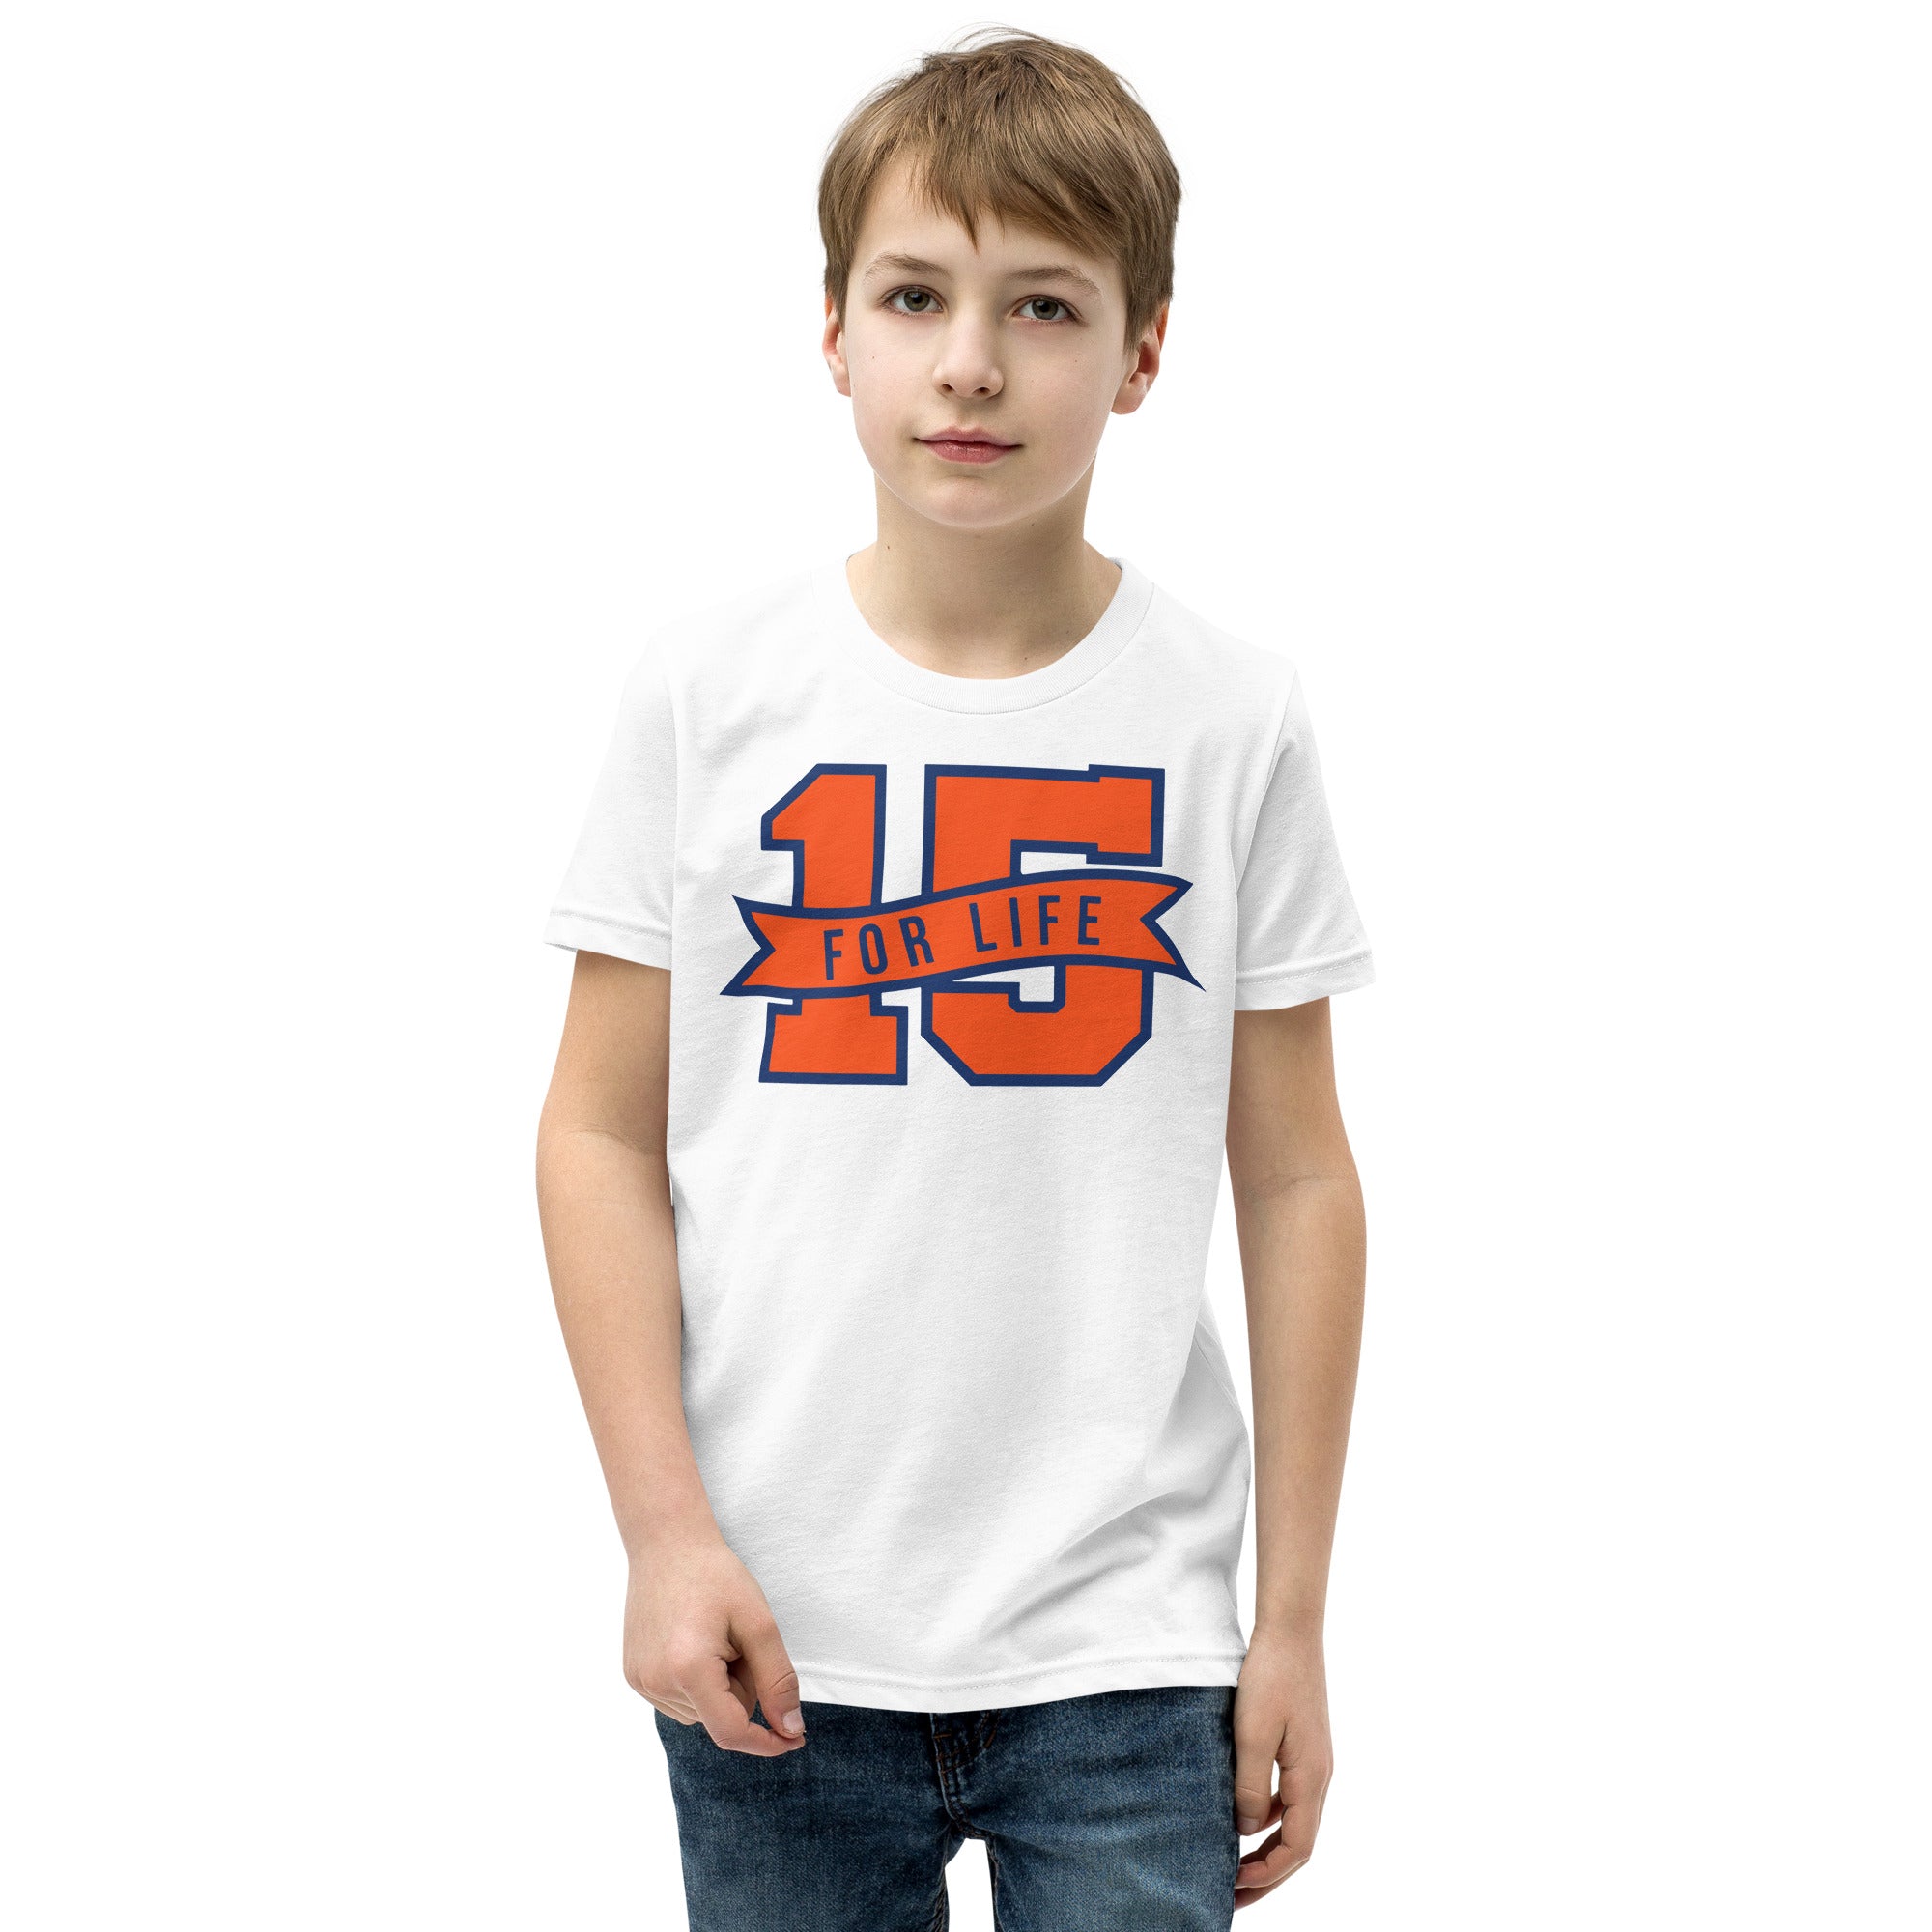 15 For Life Youth T-Shirt